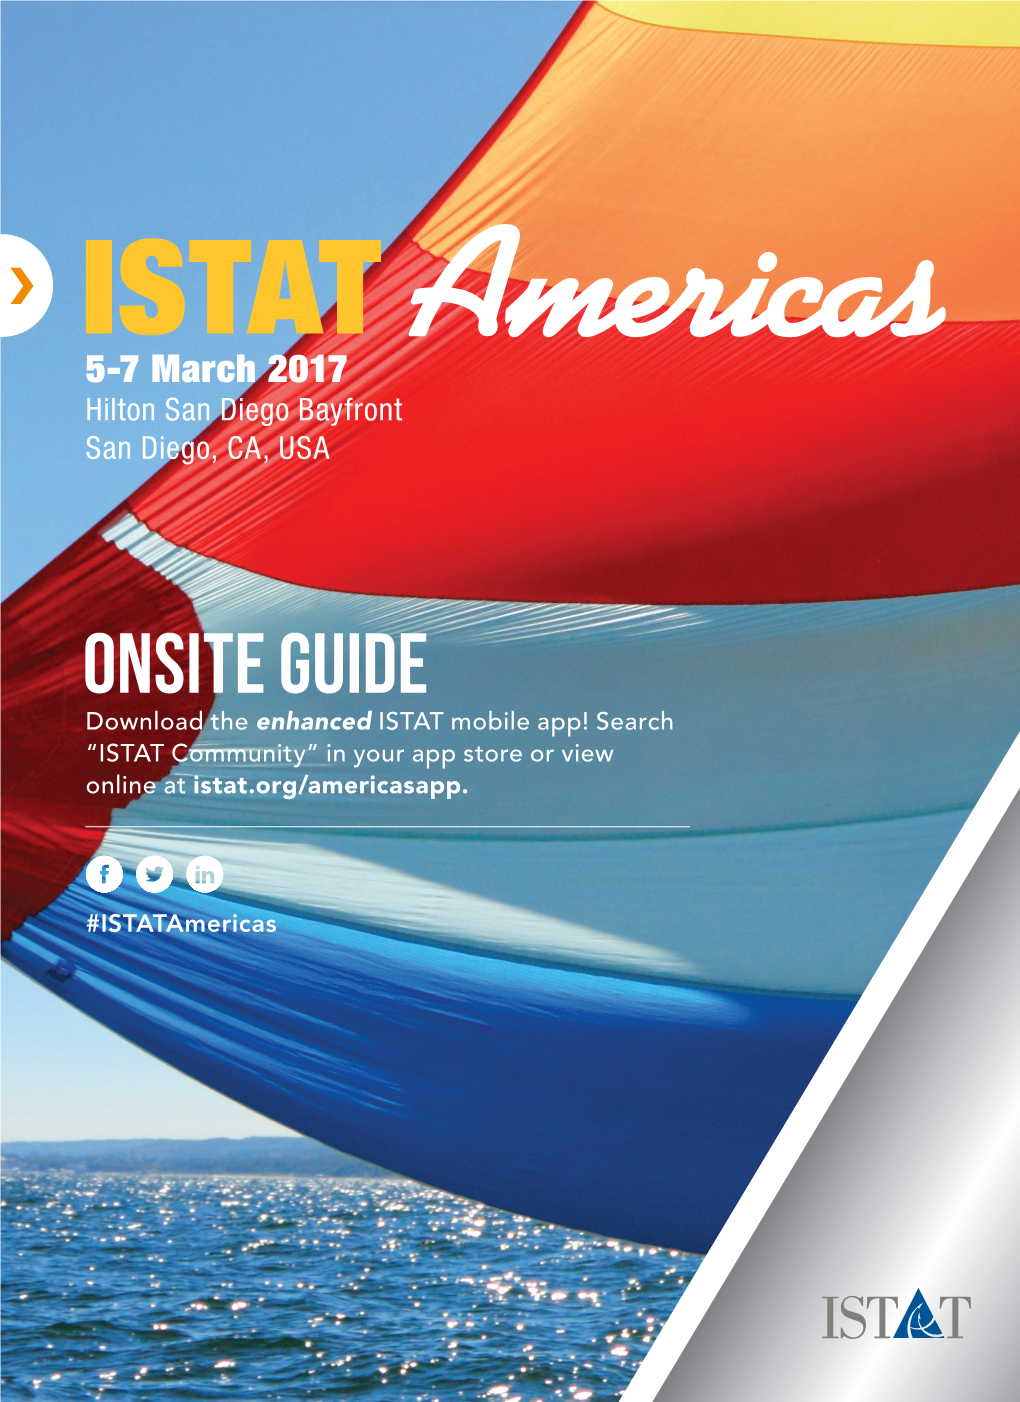 Onsite Guide Download the Enhanced ISTAT Mobile App! Search “ISTAT Community” in Your App Store Or View Online at Istat.Org/Americasapp